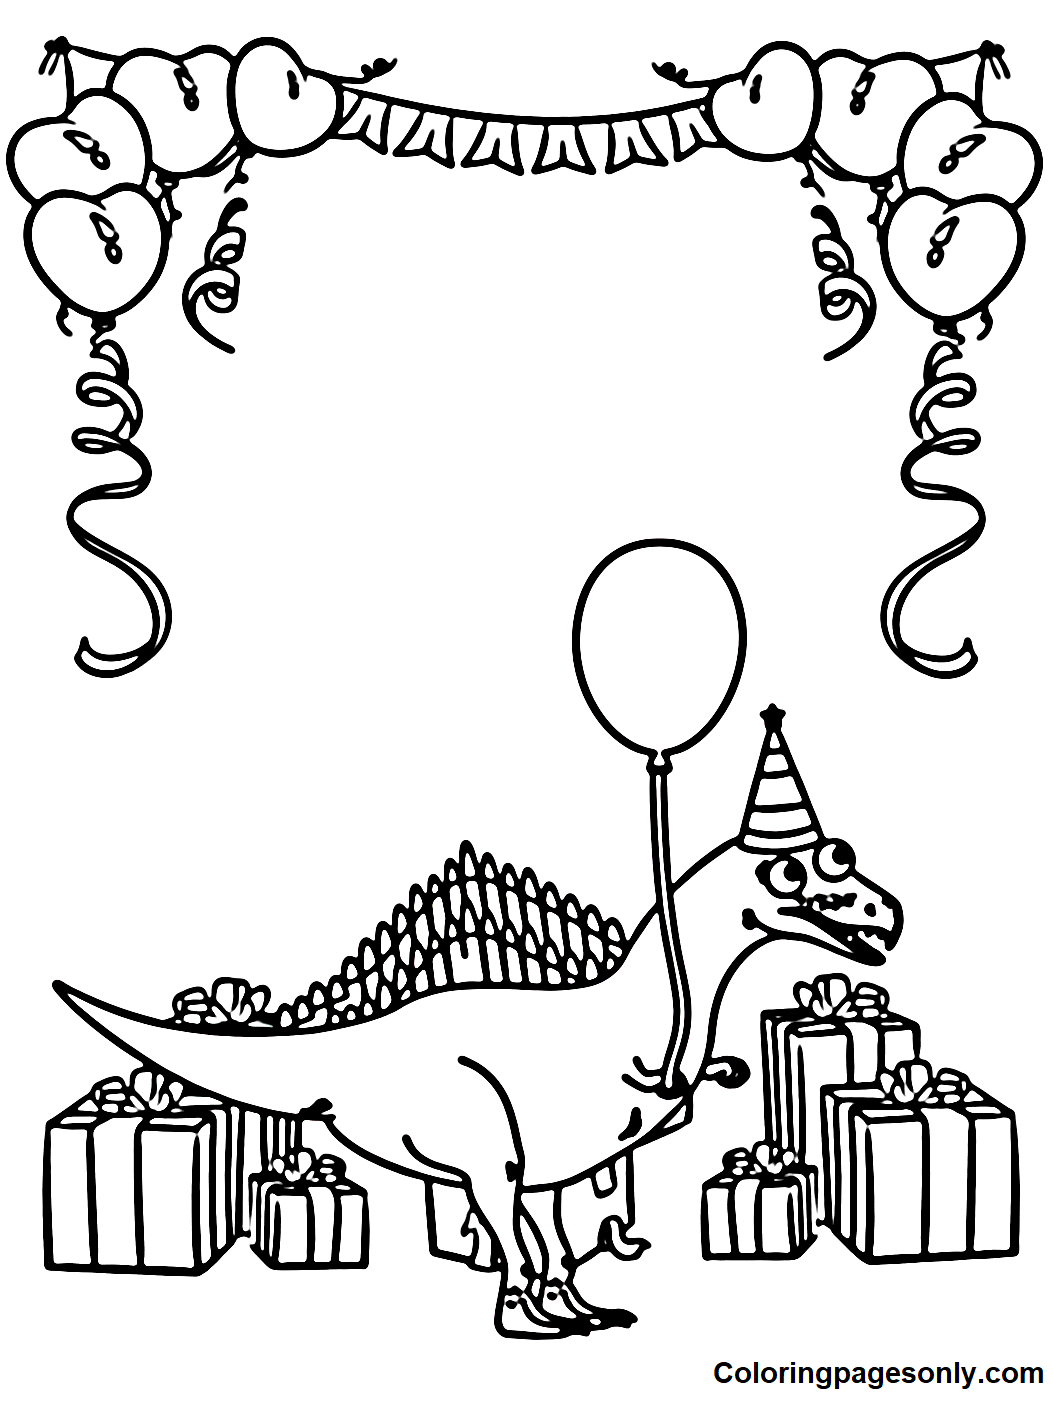 Spinosaurus with Balloon Coloring Page